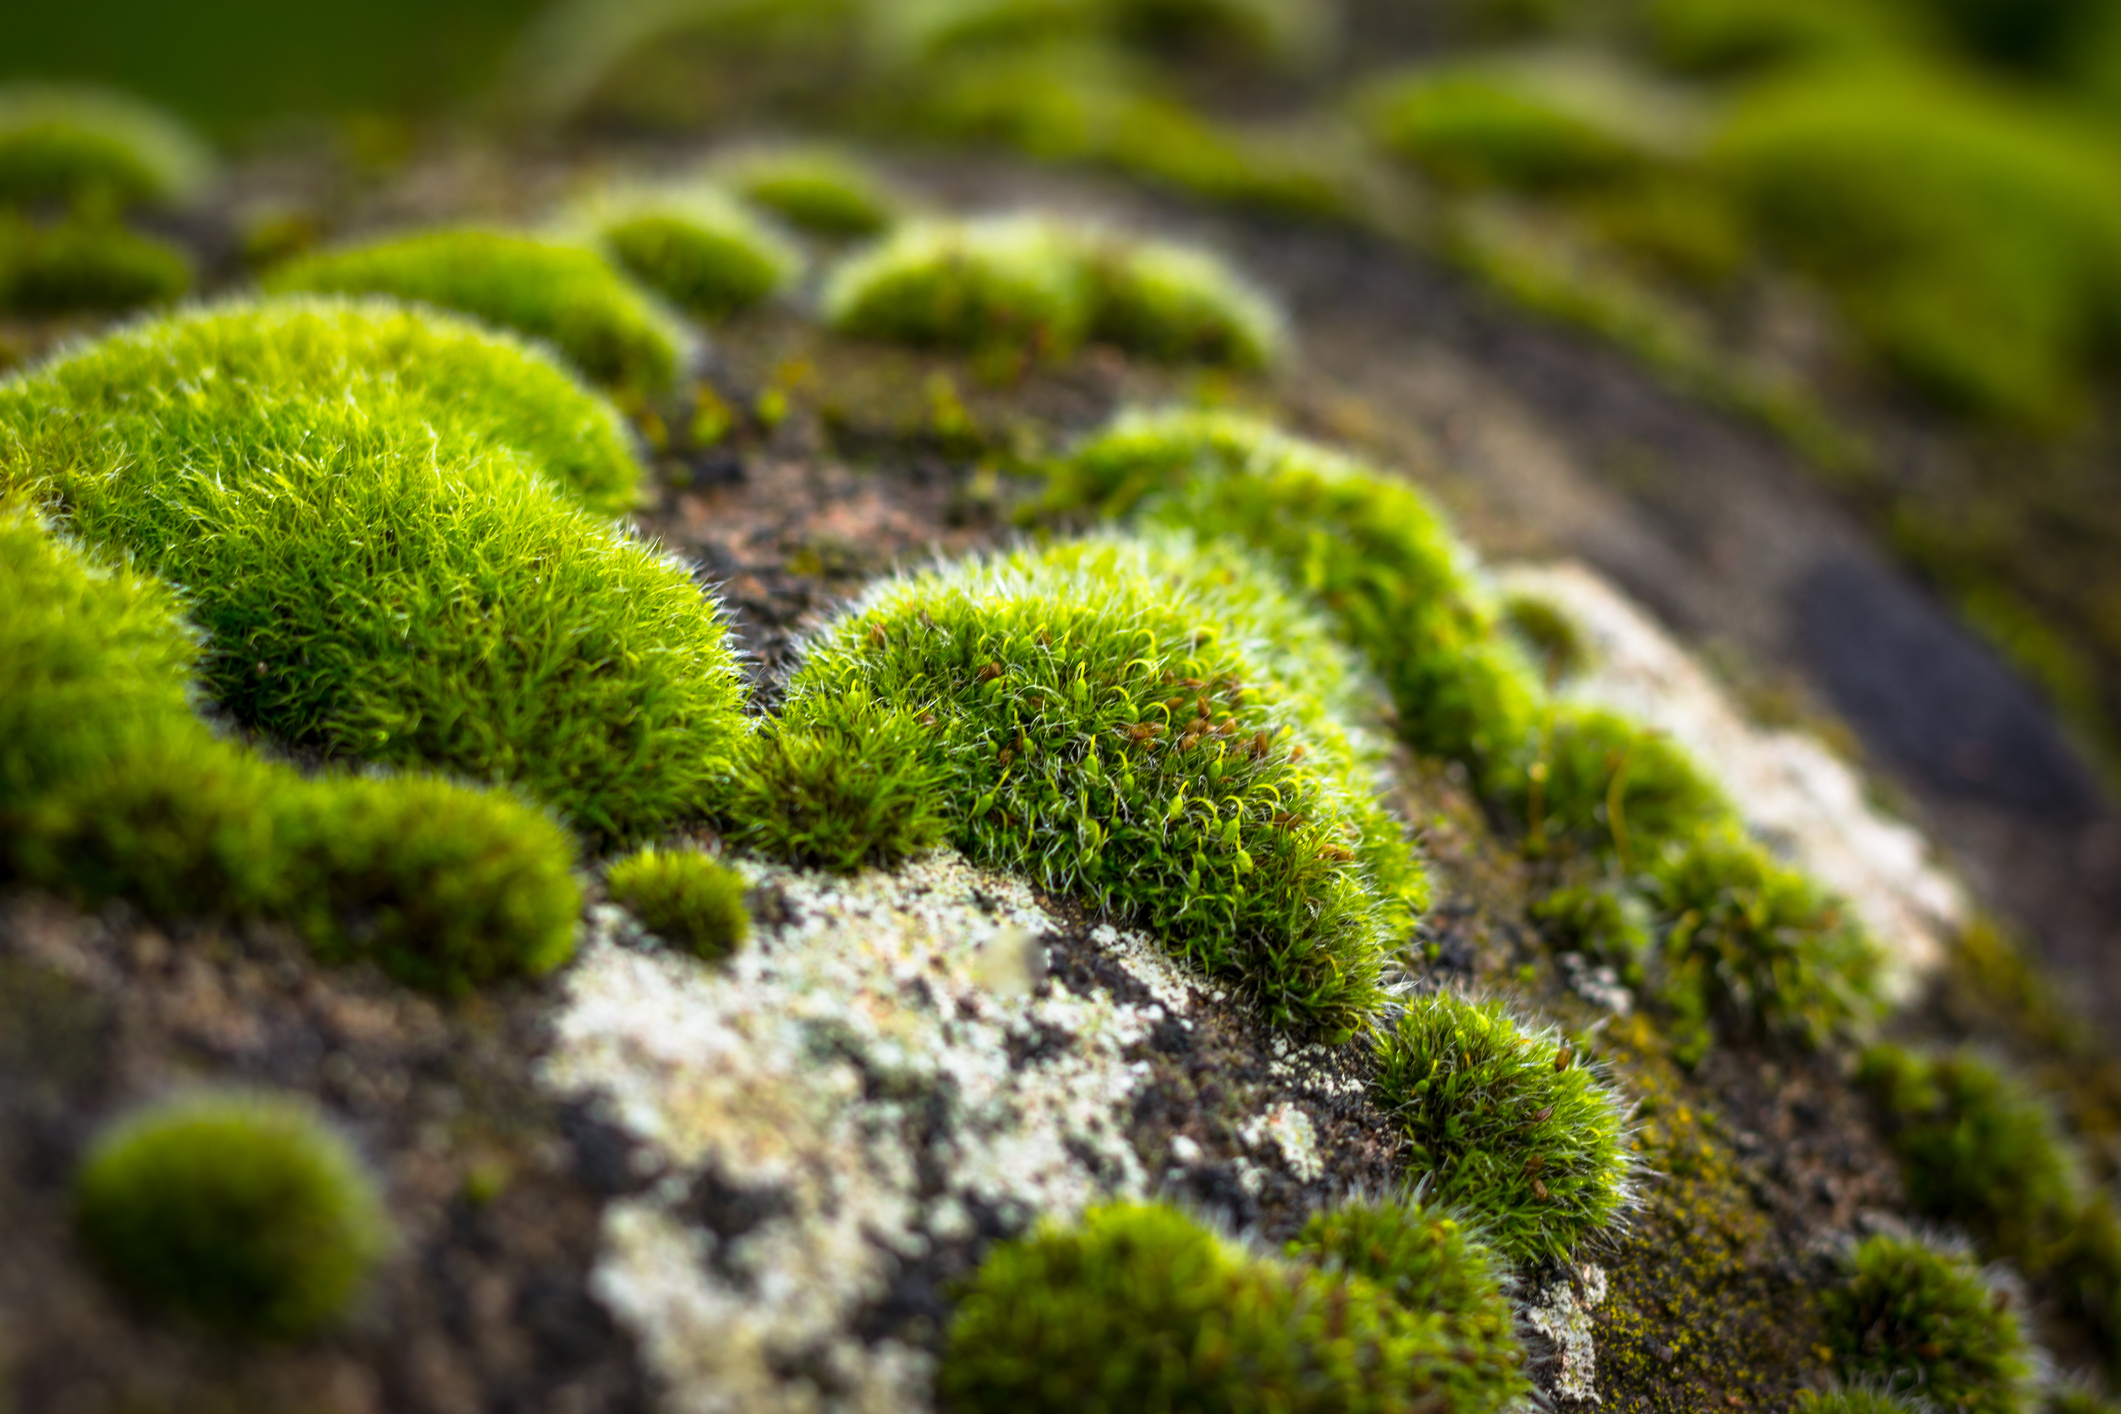 How to watch The Magical World Of Moss - Discover Wildlife